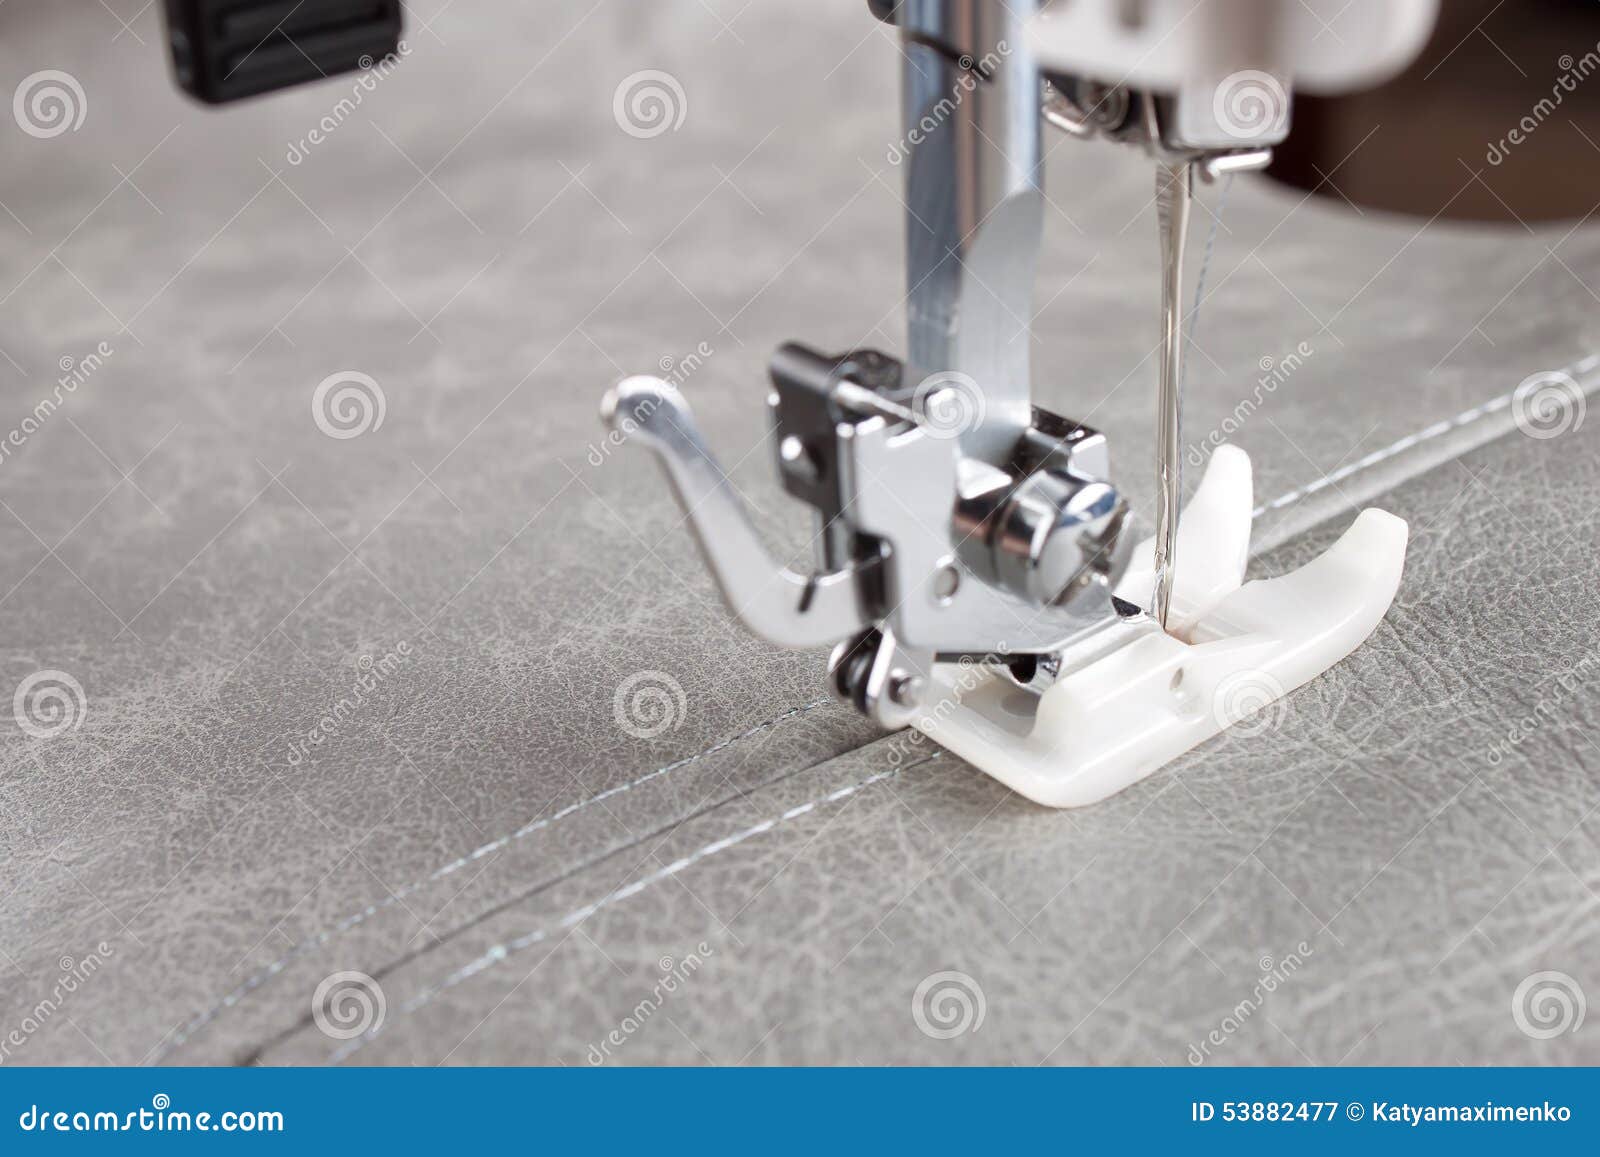 Sewing Machine Needles For Leather Stock Photo - Download Image